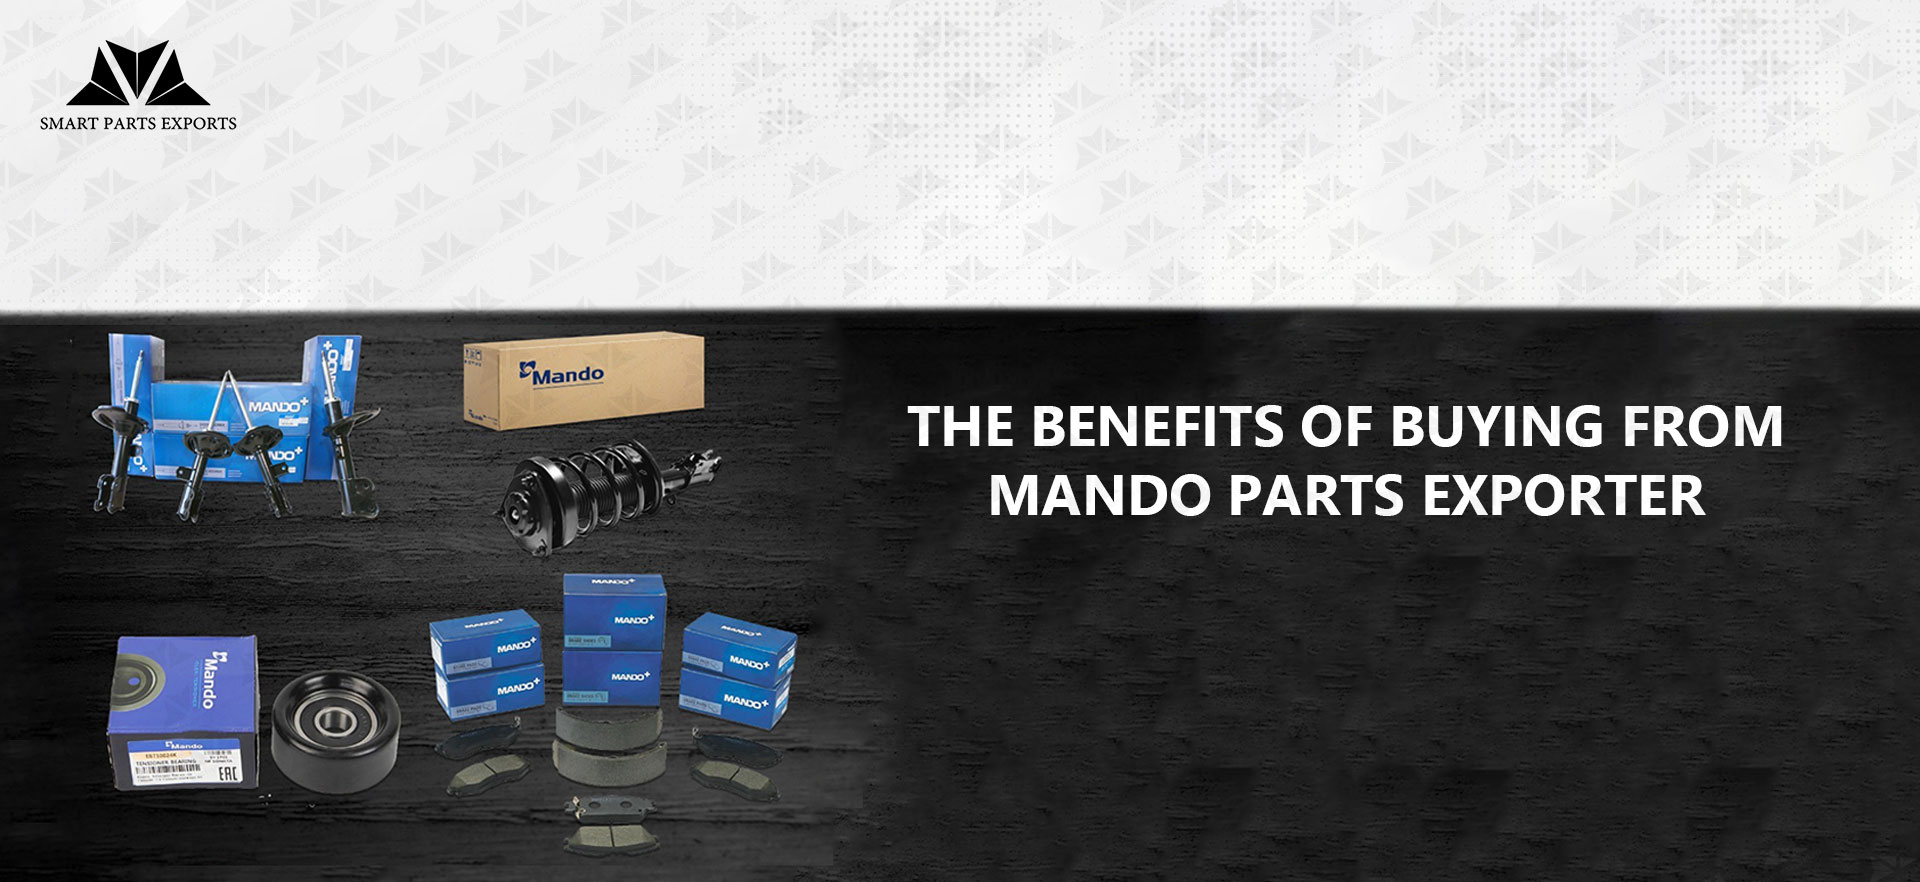 The Benefits of Buying from Mando Parts Exporter